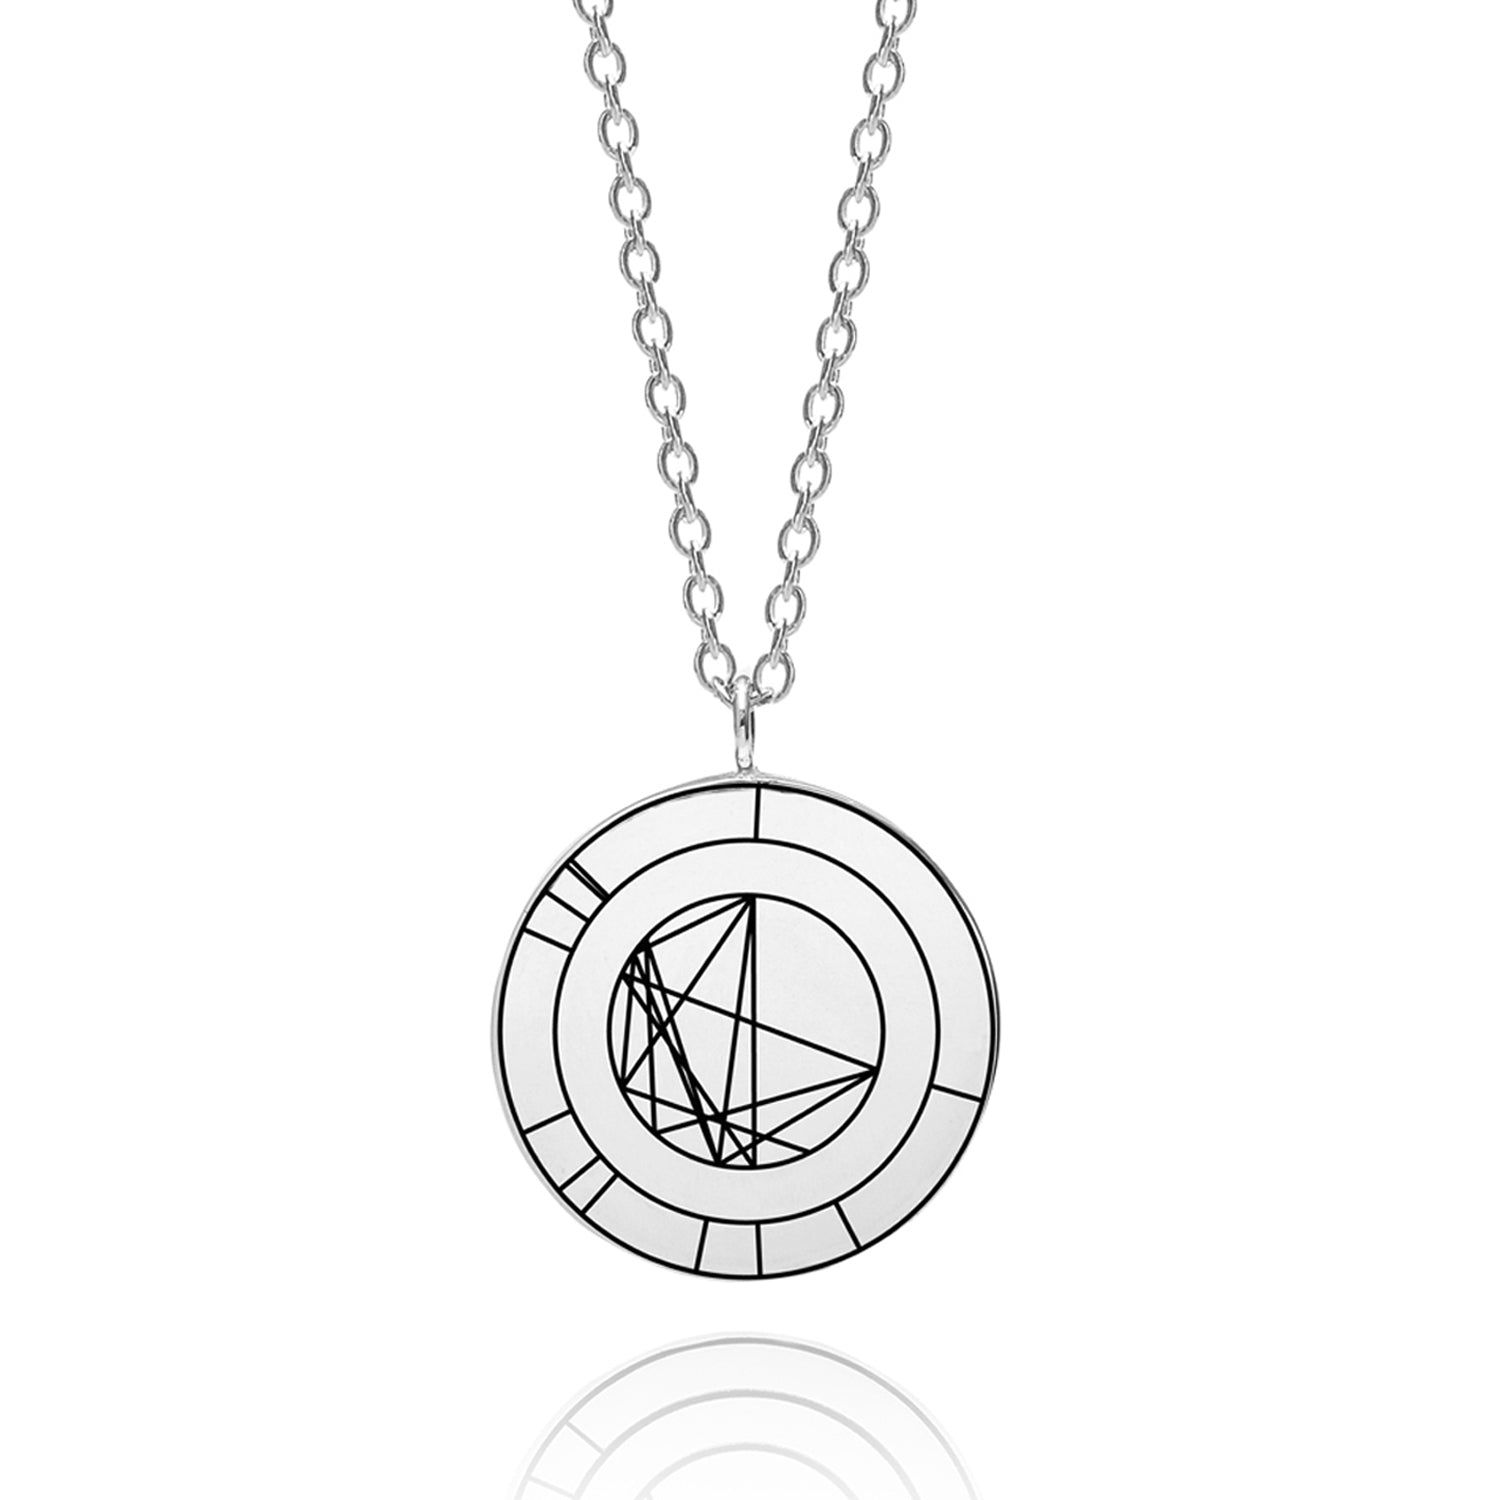 Birth Chart Necklaces